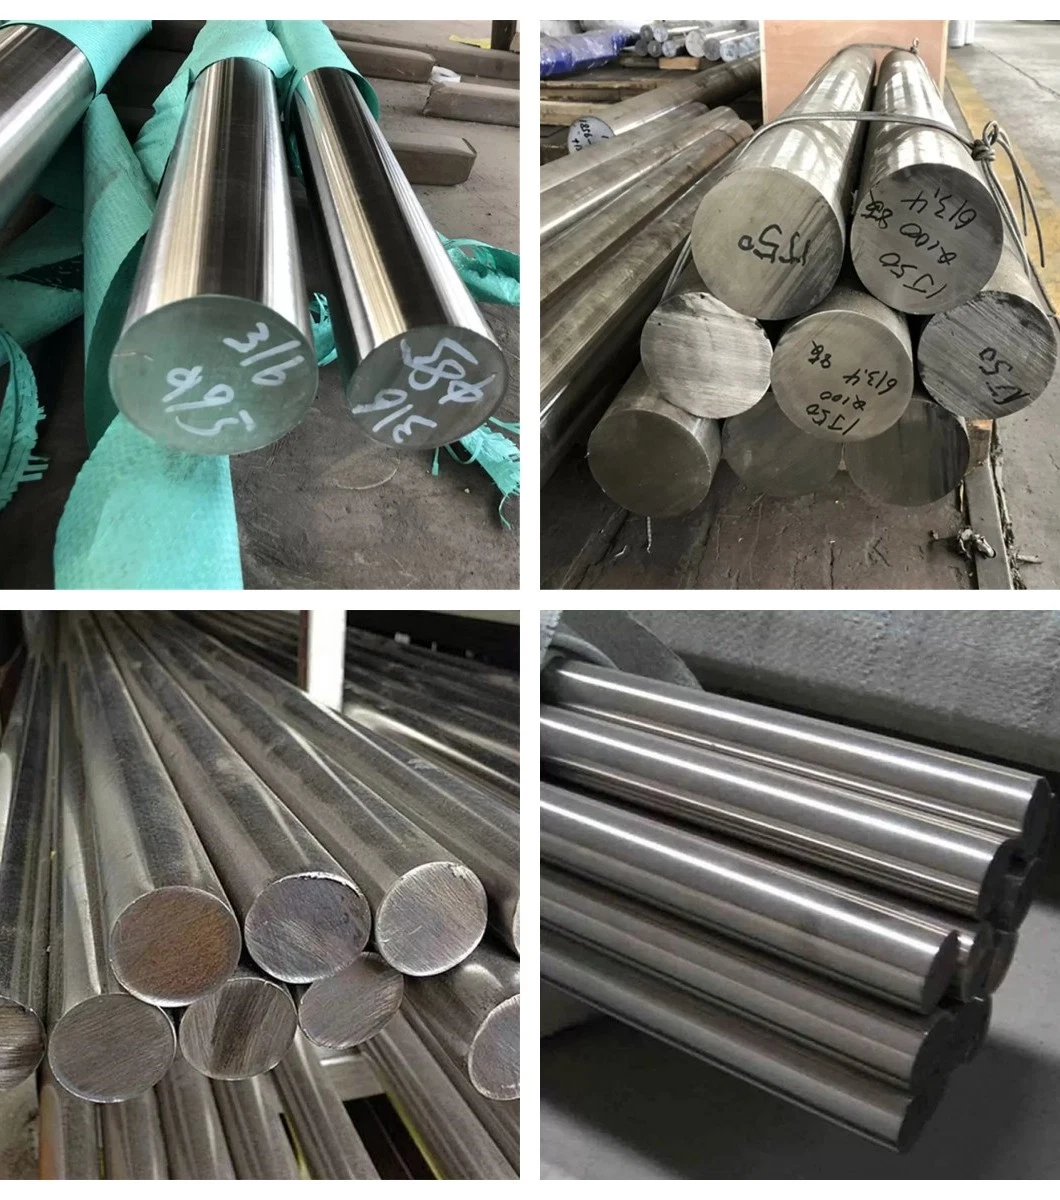 ASTM SUS 5mm, 6mm, 10mm, 12mm Metal Rod Polish 304 Stainless Steel Round Bar Price List